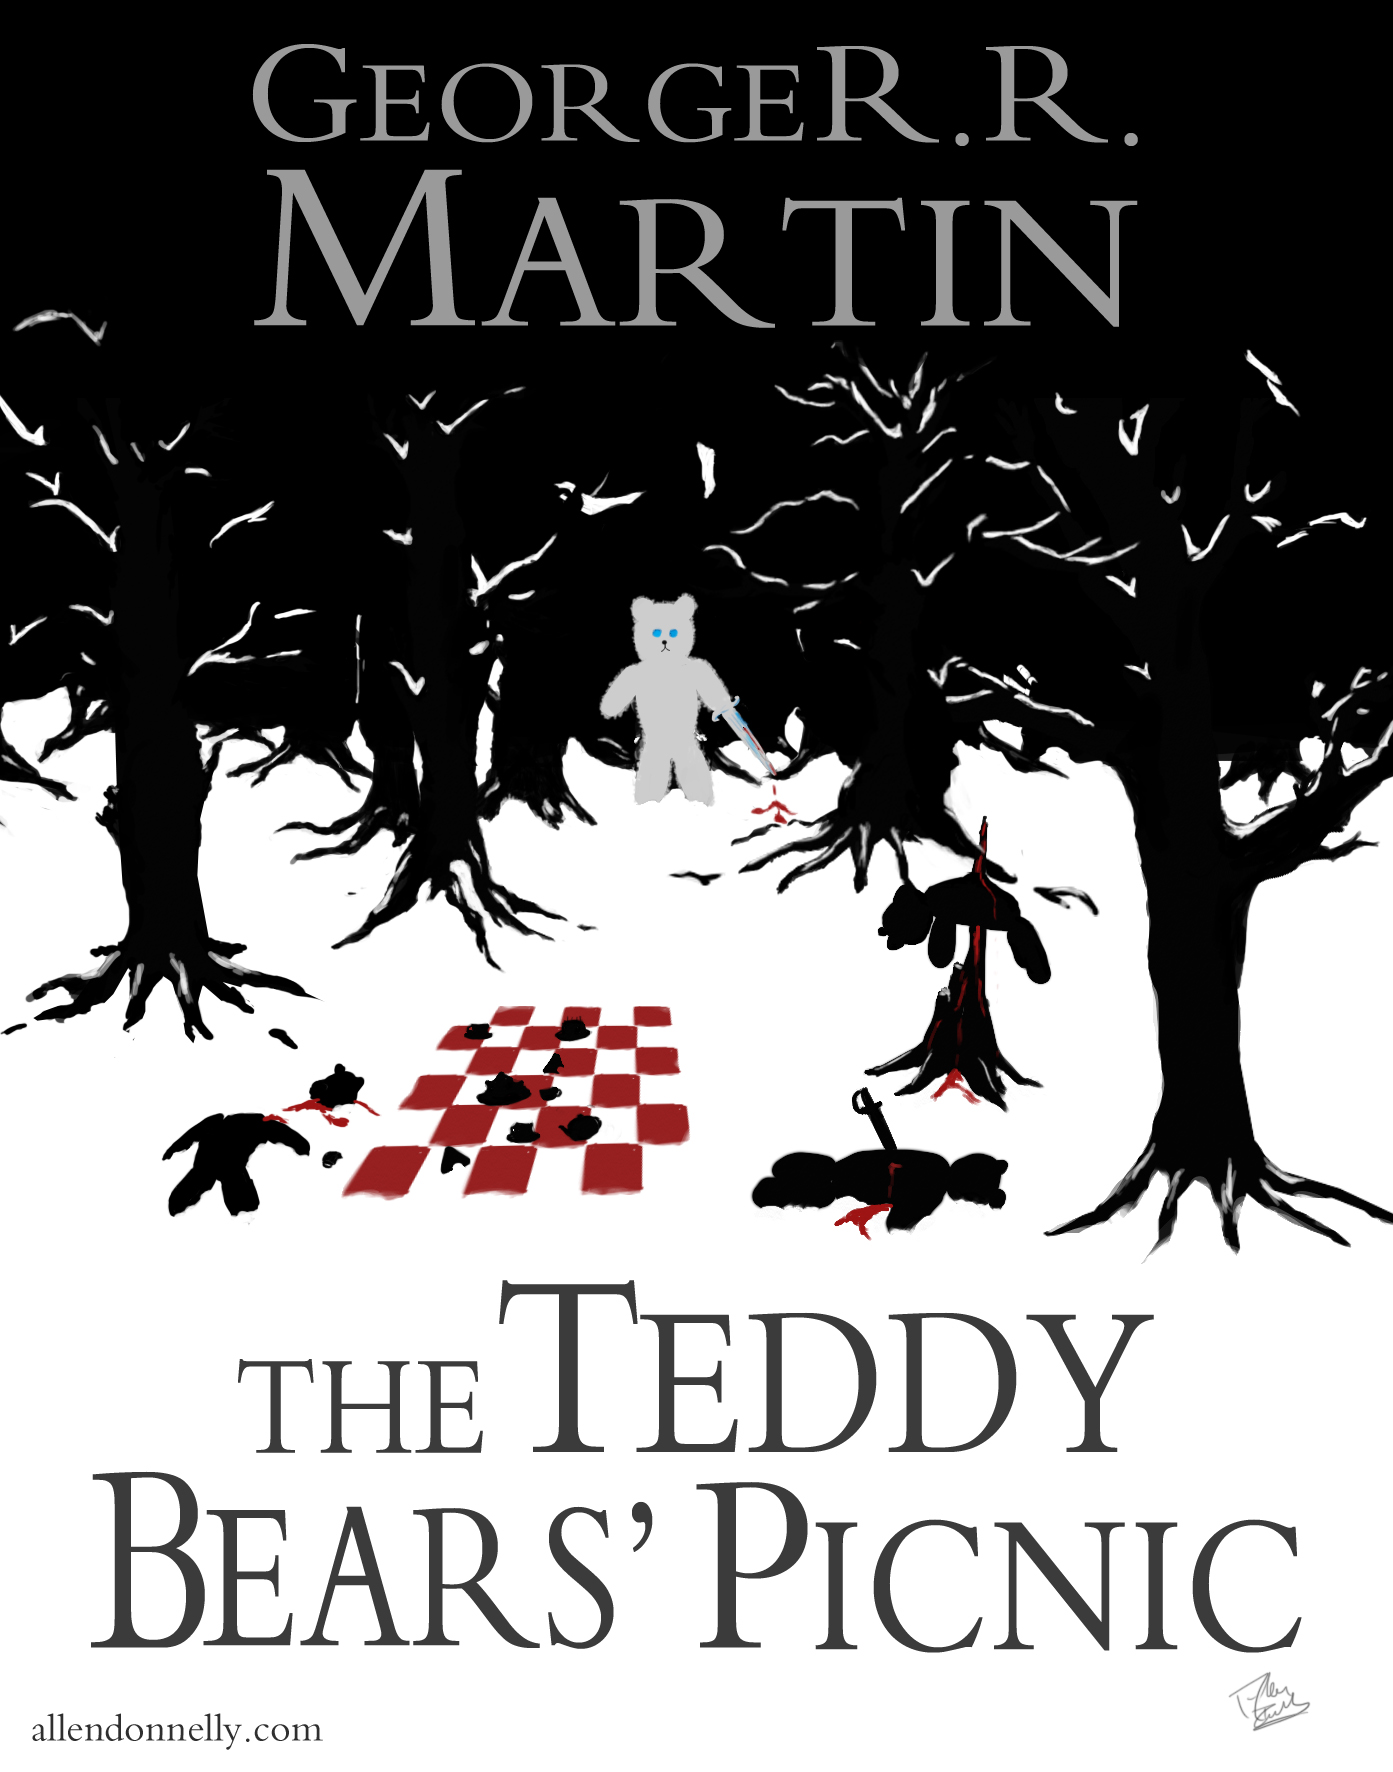 The Red Picnic